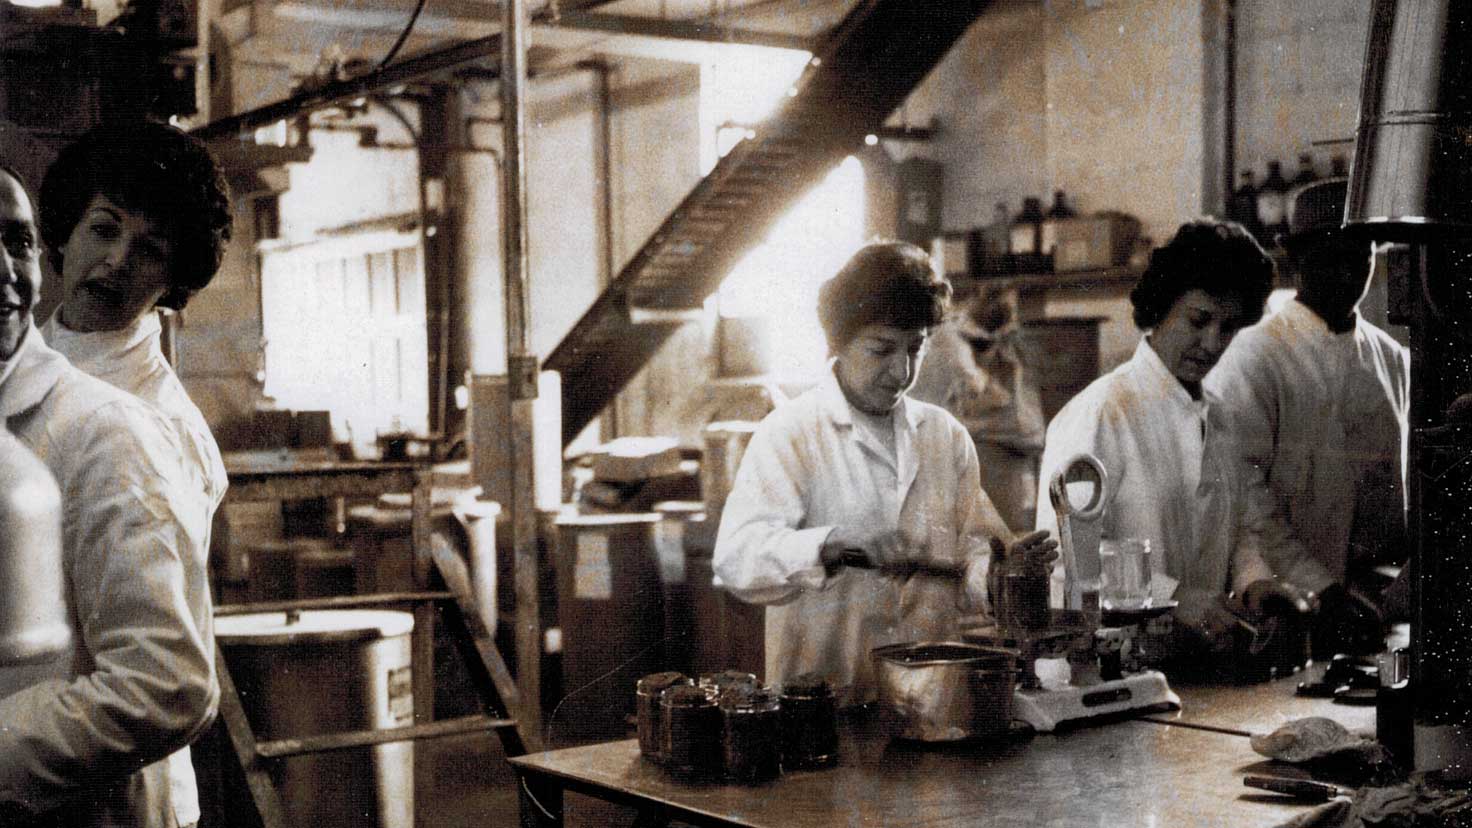 Workers at Major Products' original facility during the 1950's